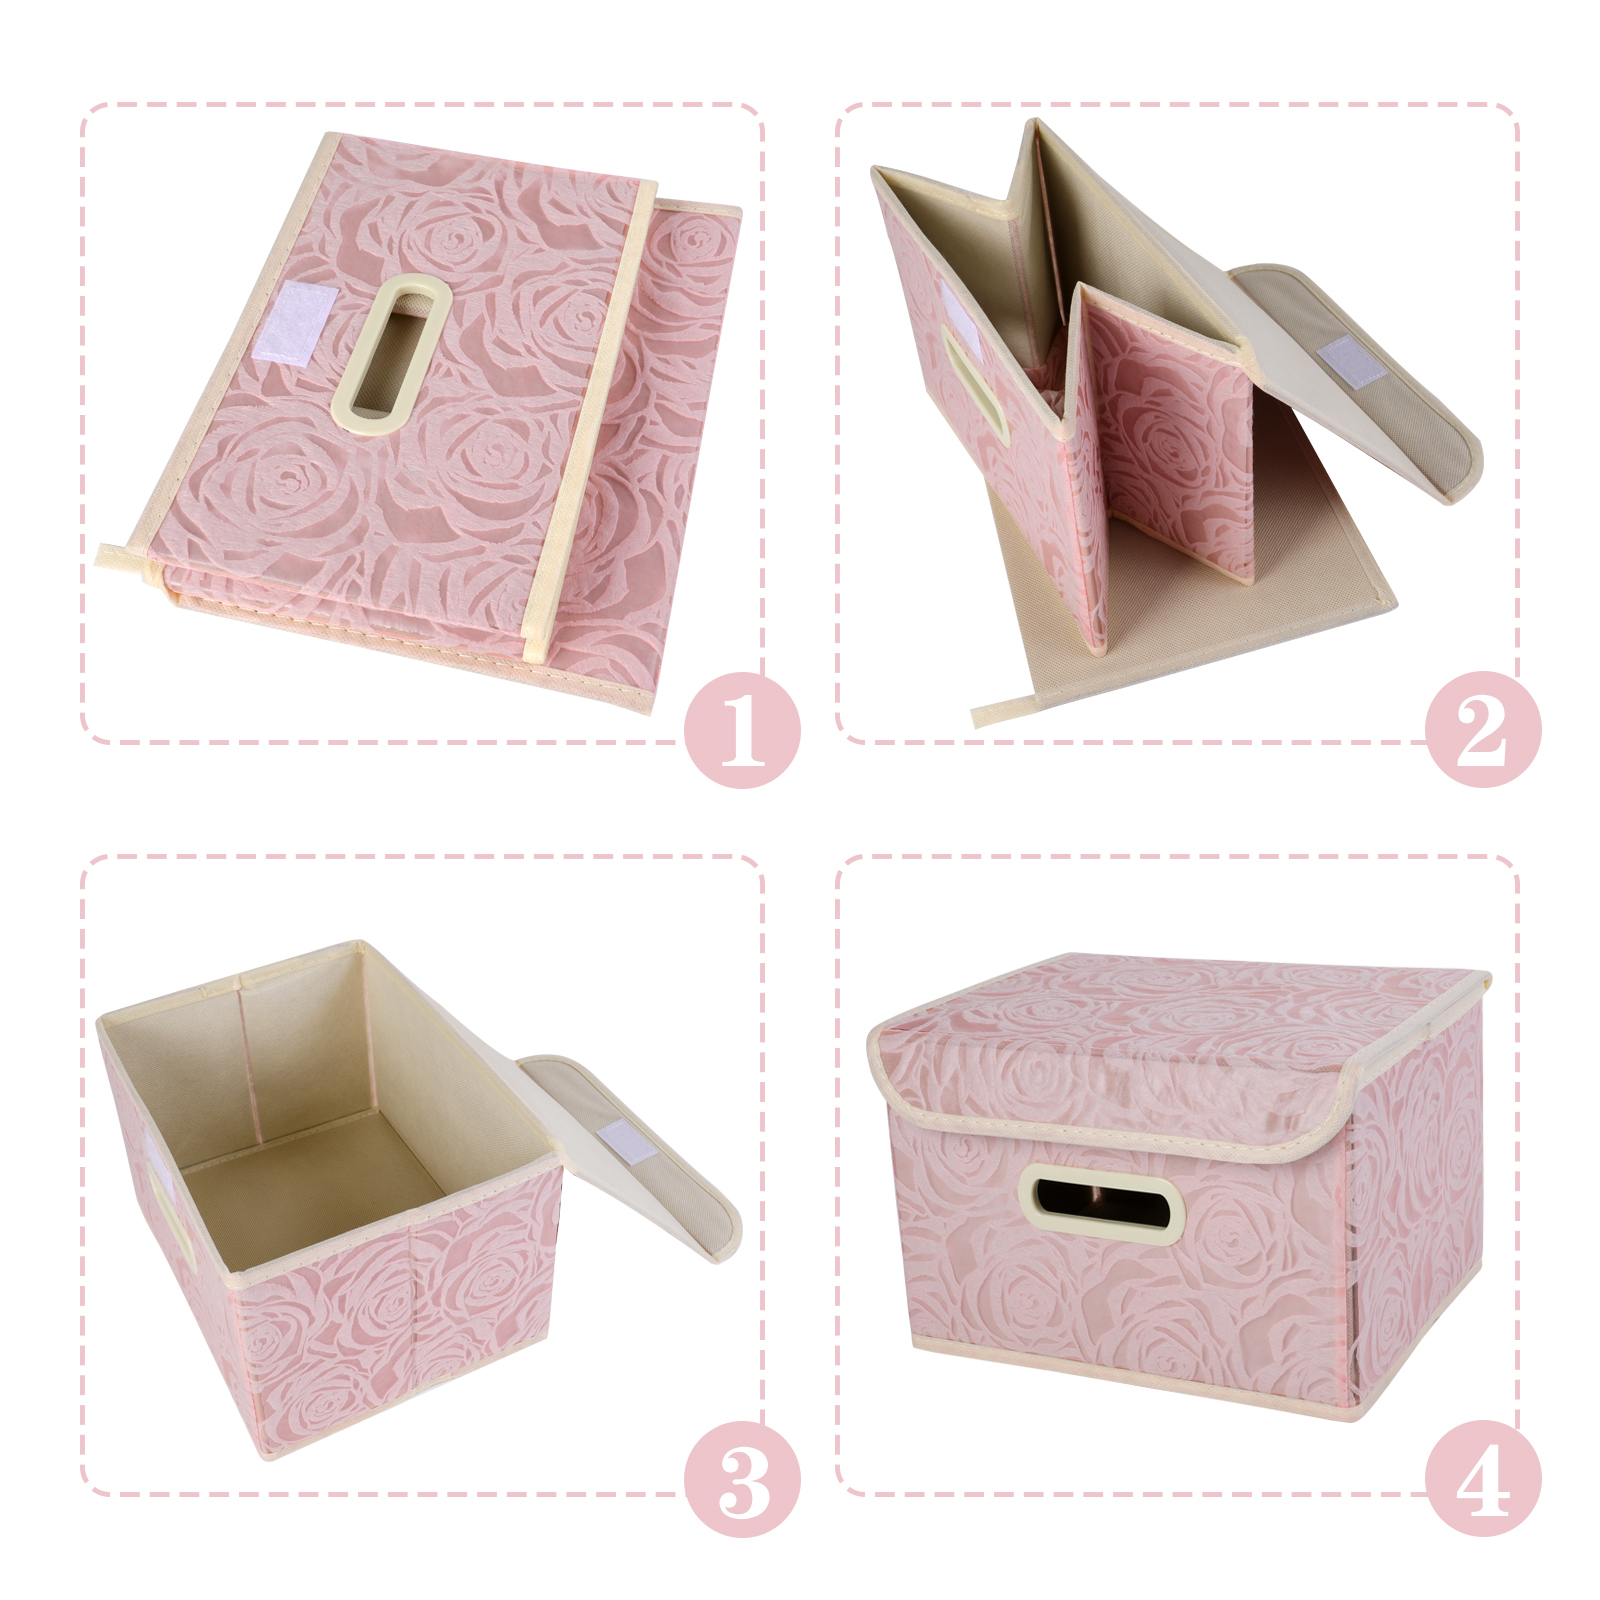 Collapsible Storage Bins with Lids Fabric Decorative Storage Boxes ...